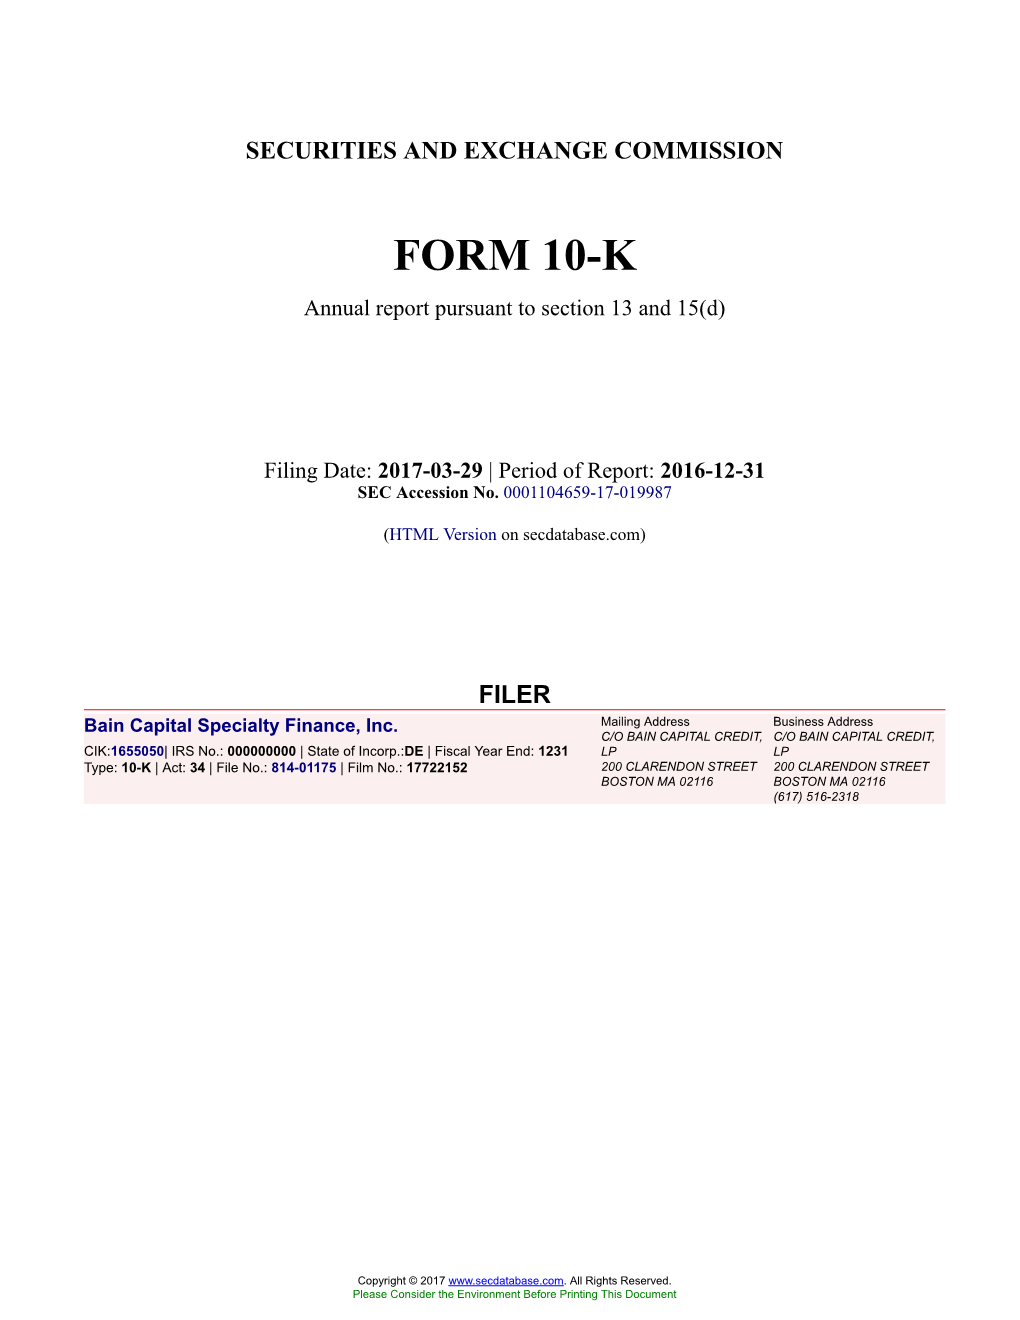 Bain Capital Specialty Finance, Inc. Form 10-K Annual Report Filed 2017-03-29